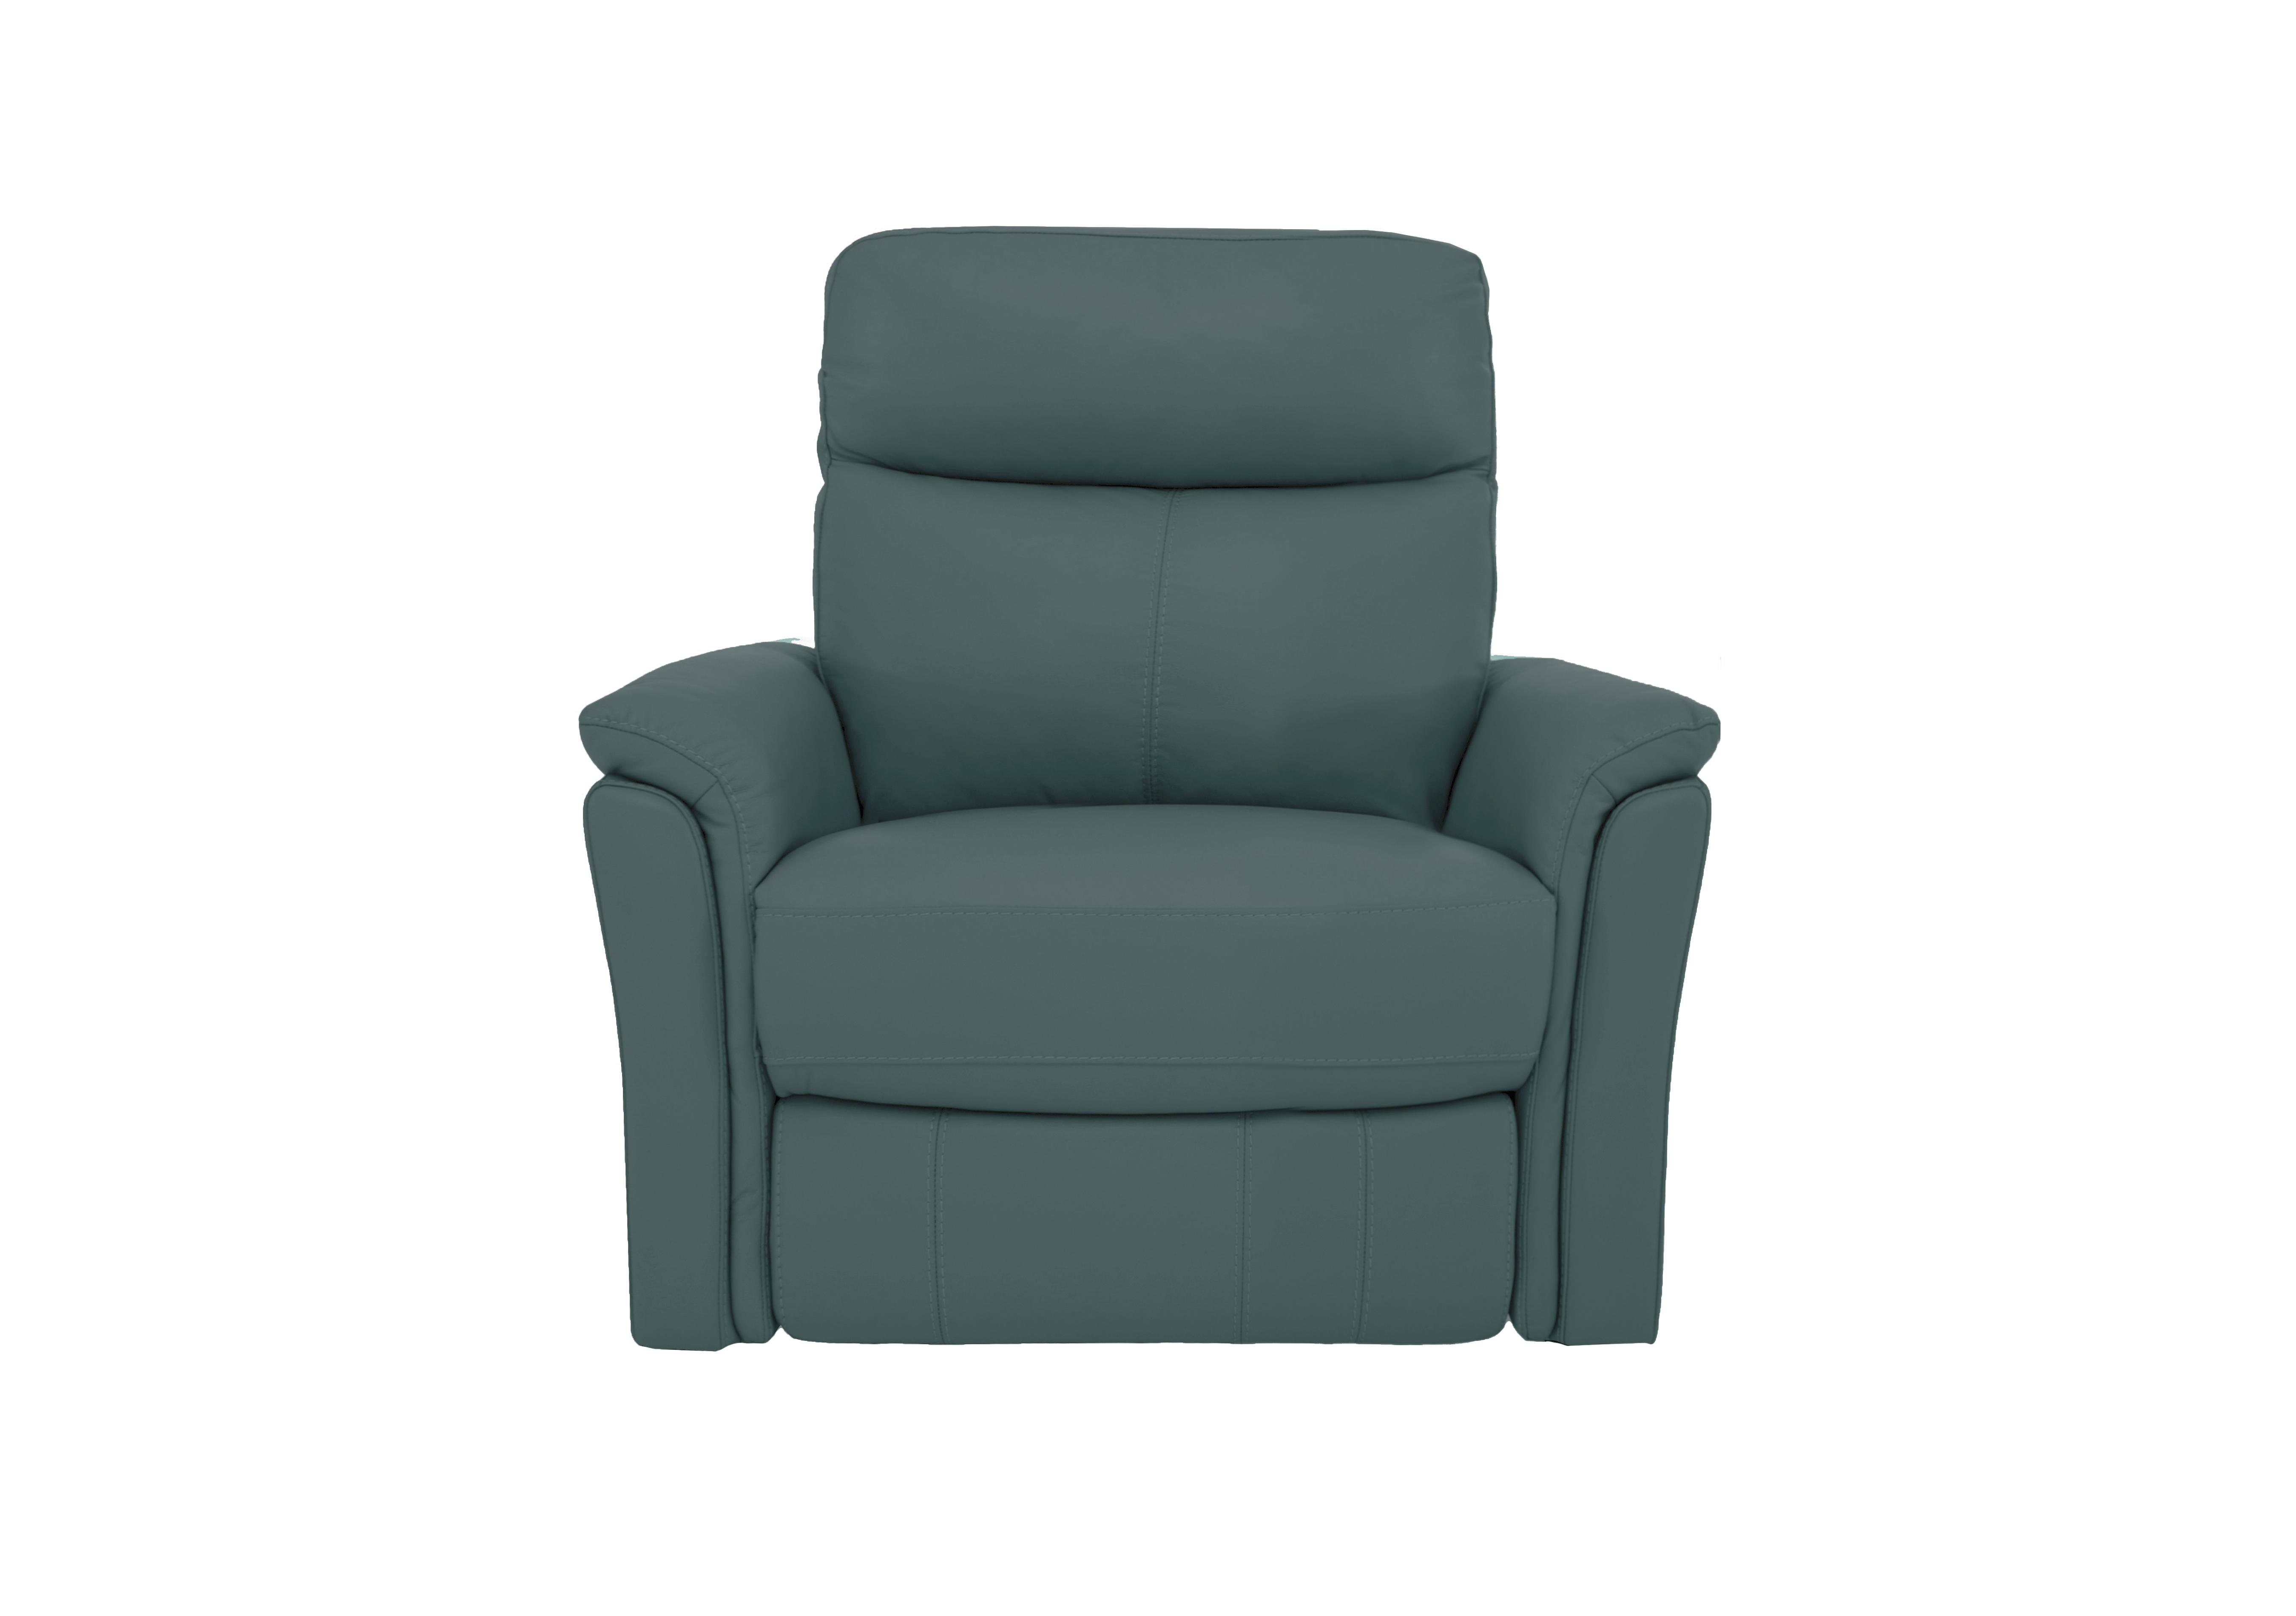 Compact Collection Piccolo Recliner Armchair in Bv-301e Lake Green on Furniture Village